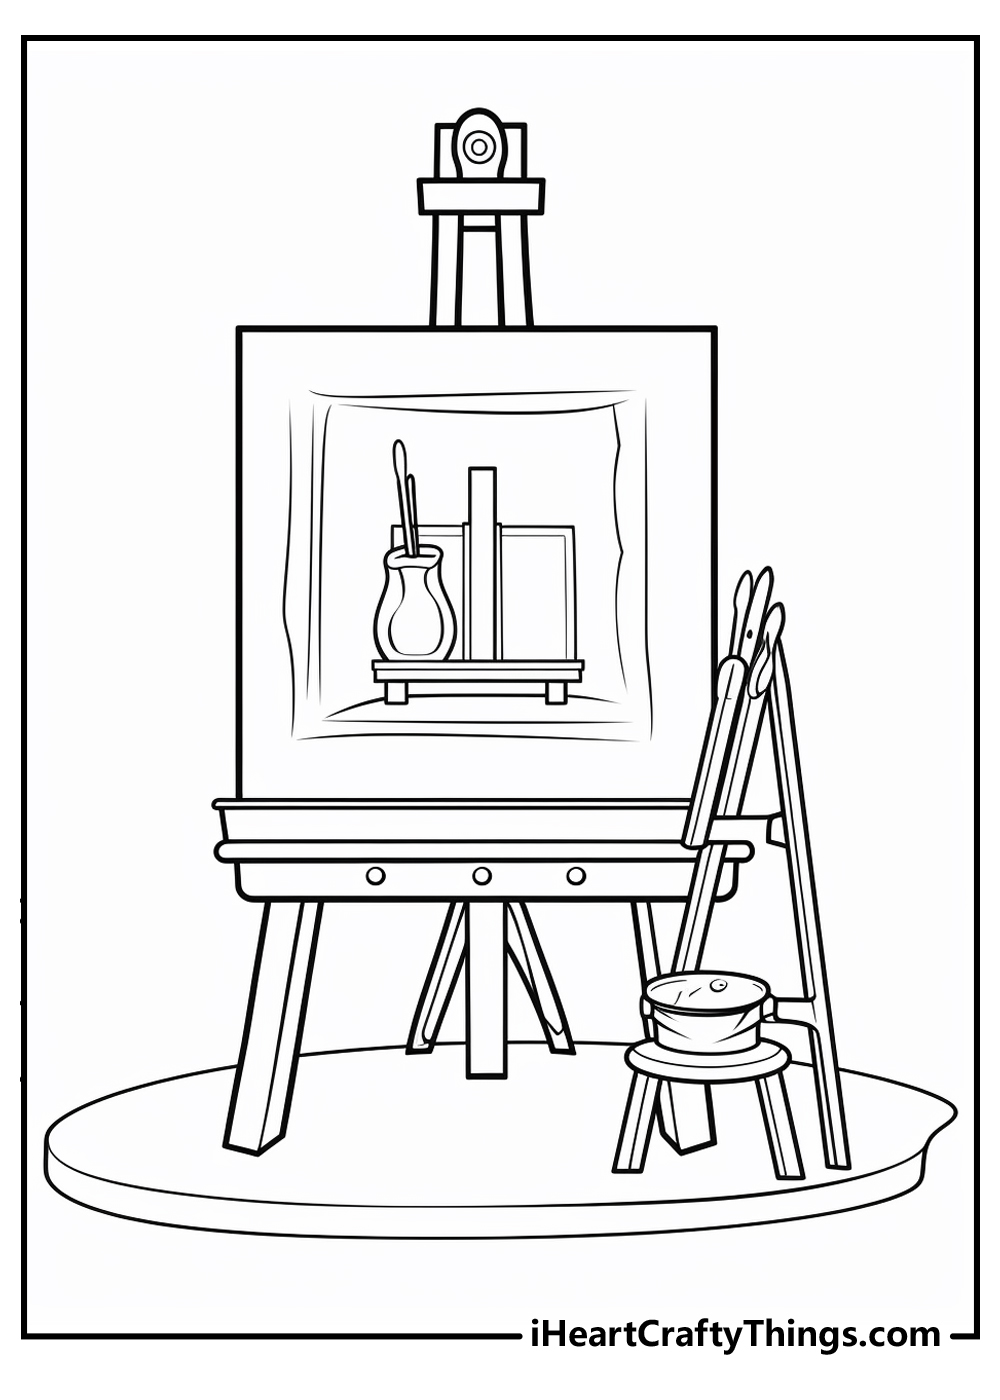 Painting On An Easel Coloring Page